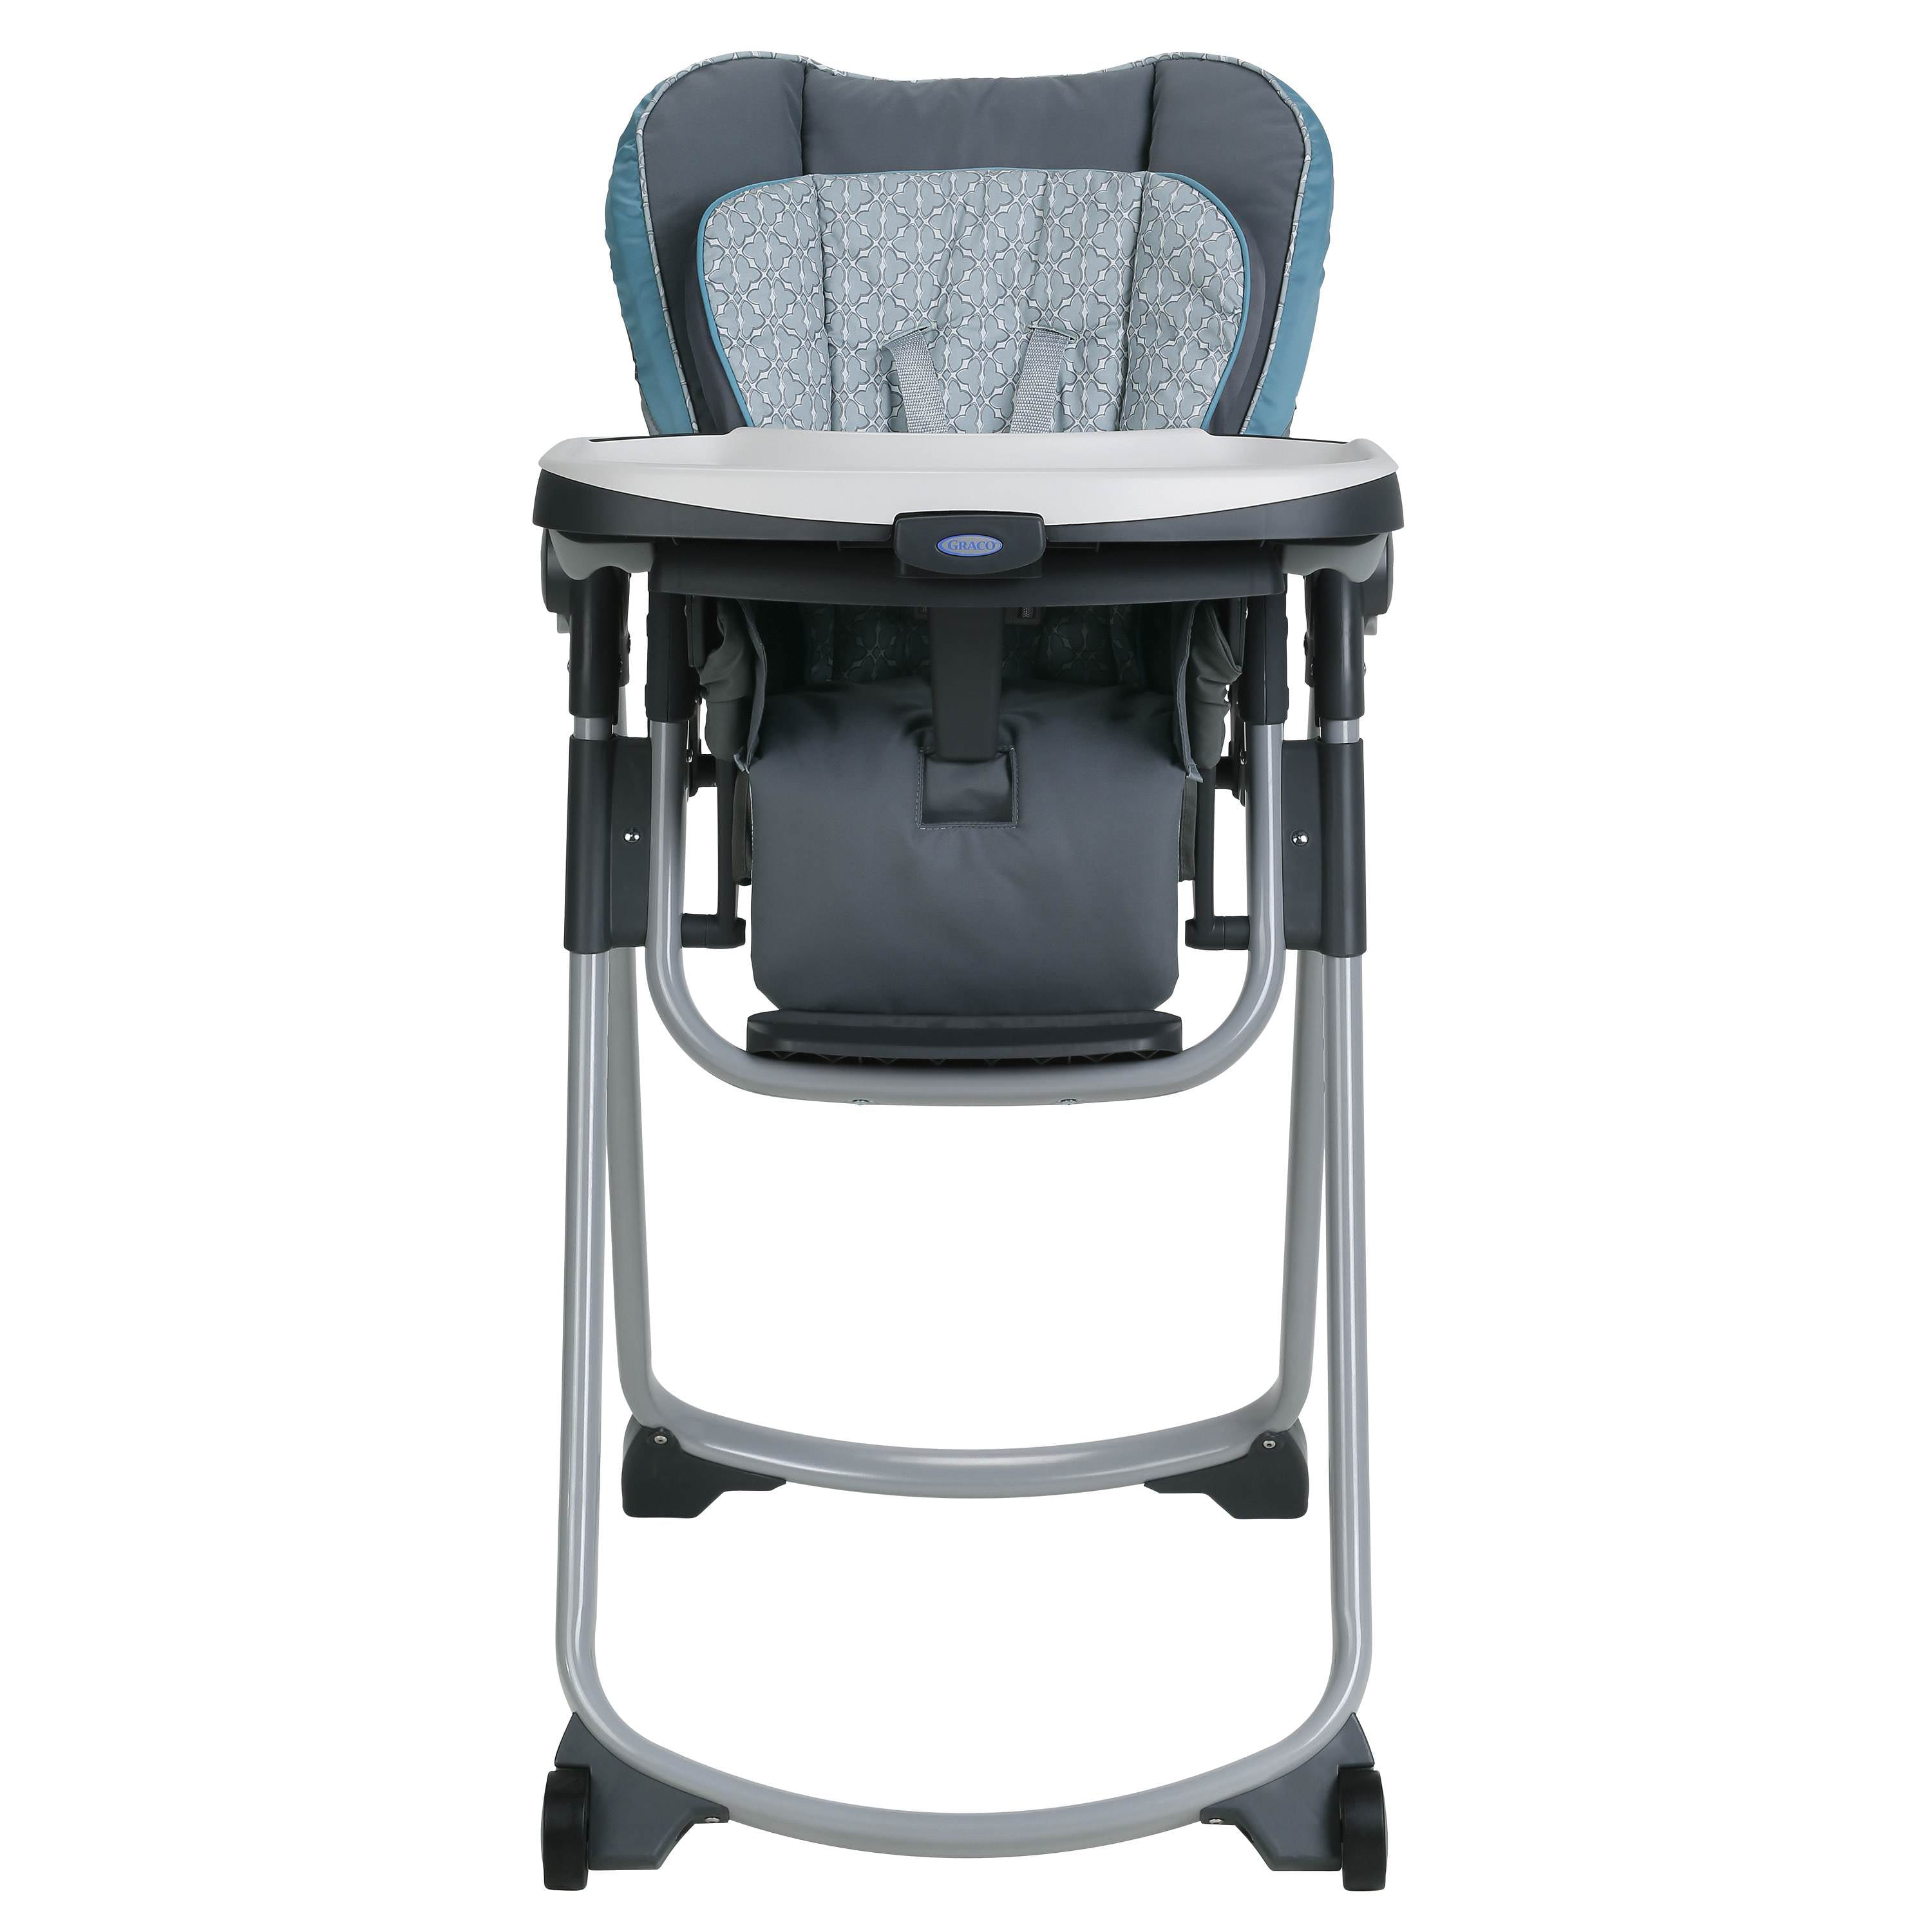 Graco Slim Spaces Compact Highchair Seating Feeding System